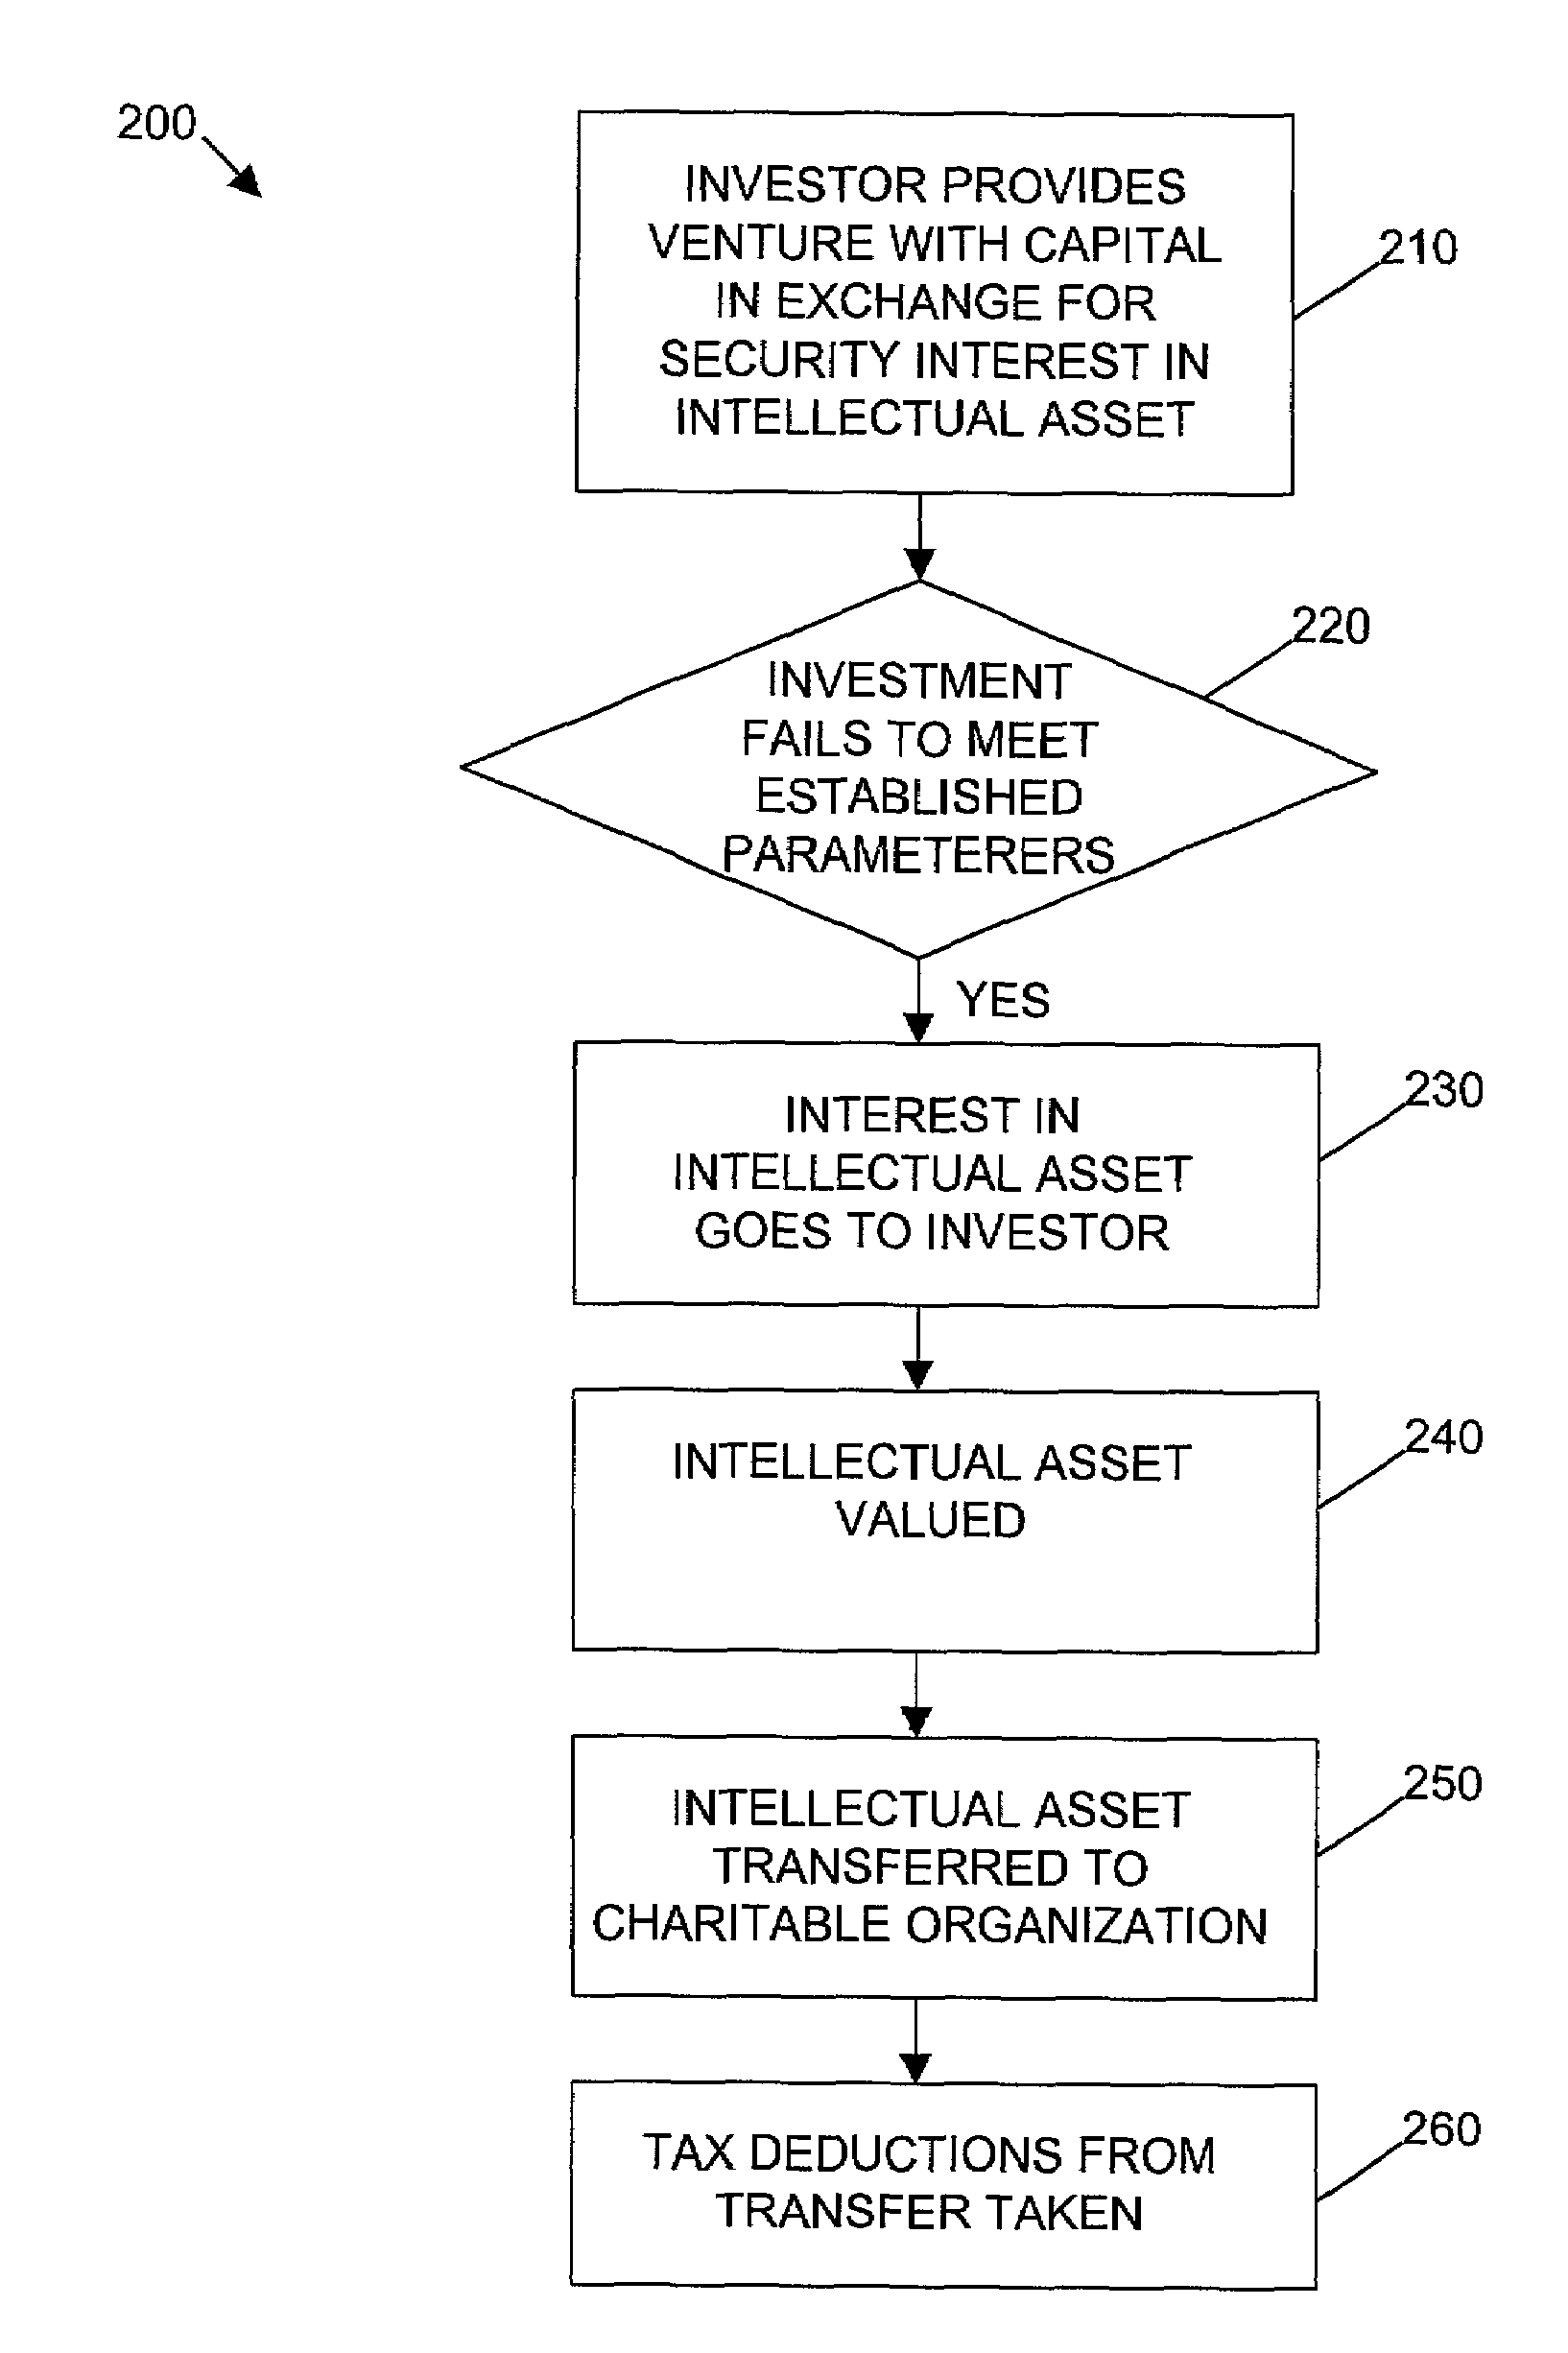 System for and method of risk minimization and enhanced returns in an intellectual capital based venture investment